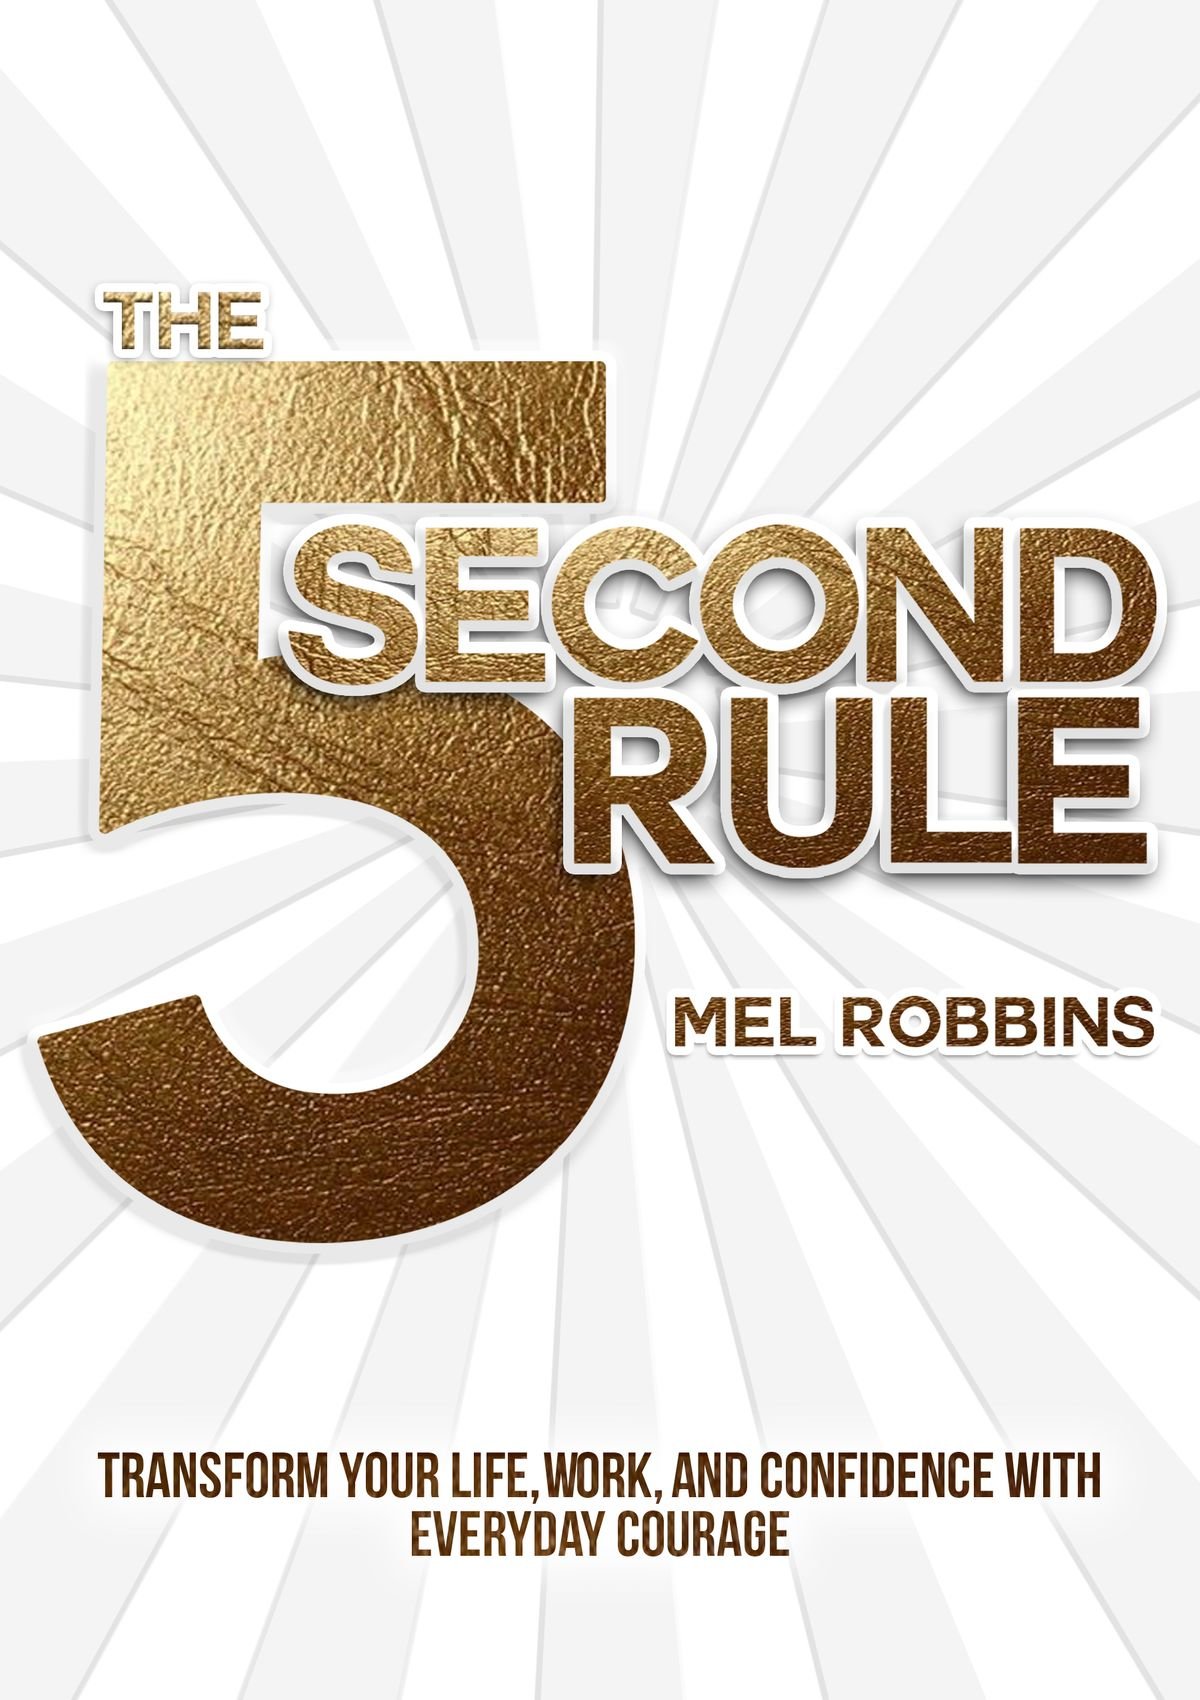 The 5 Second Rule PDF